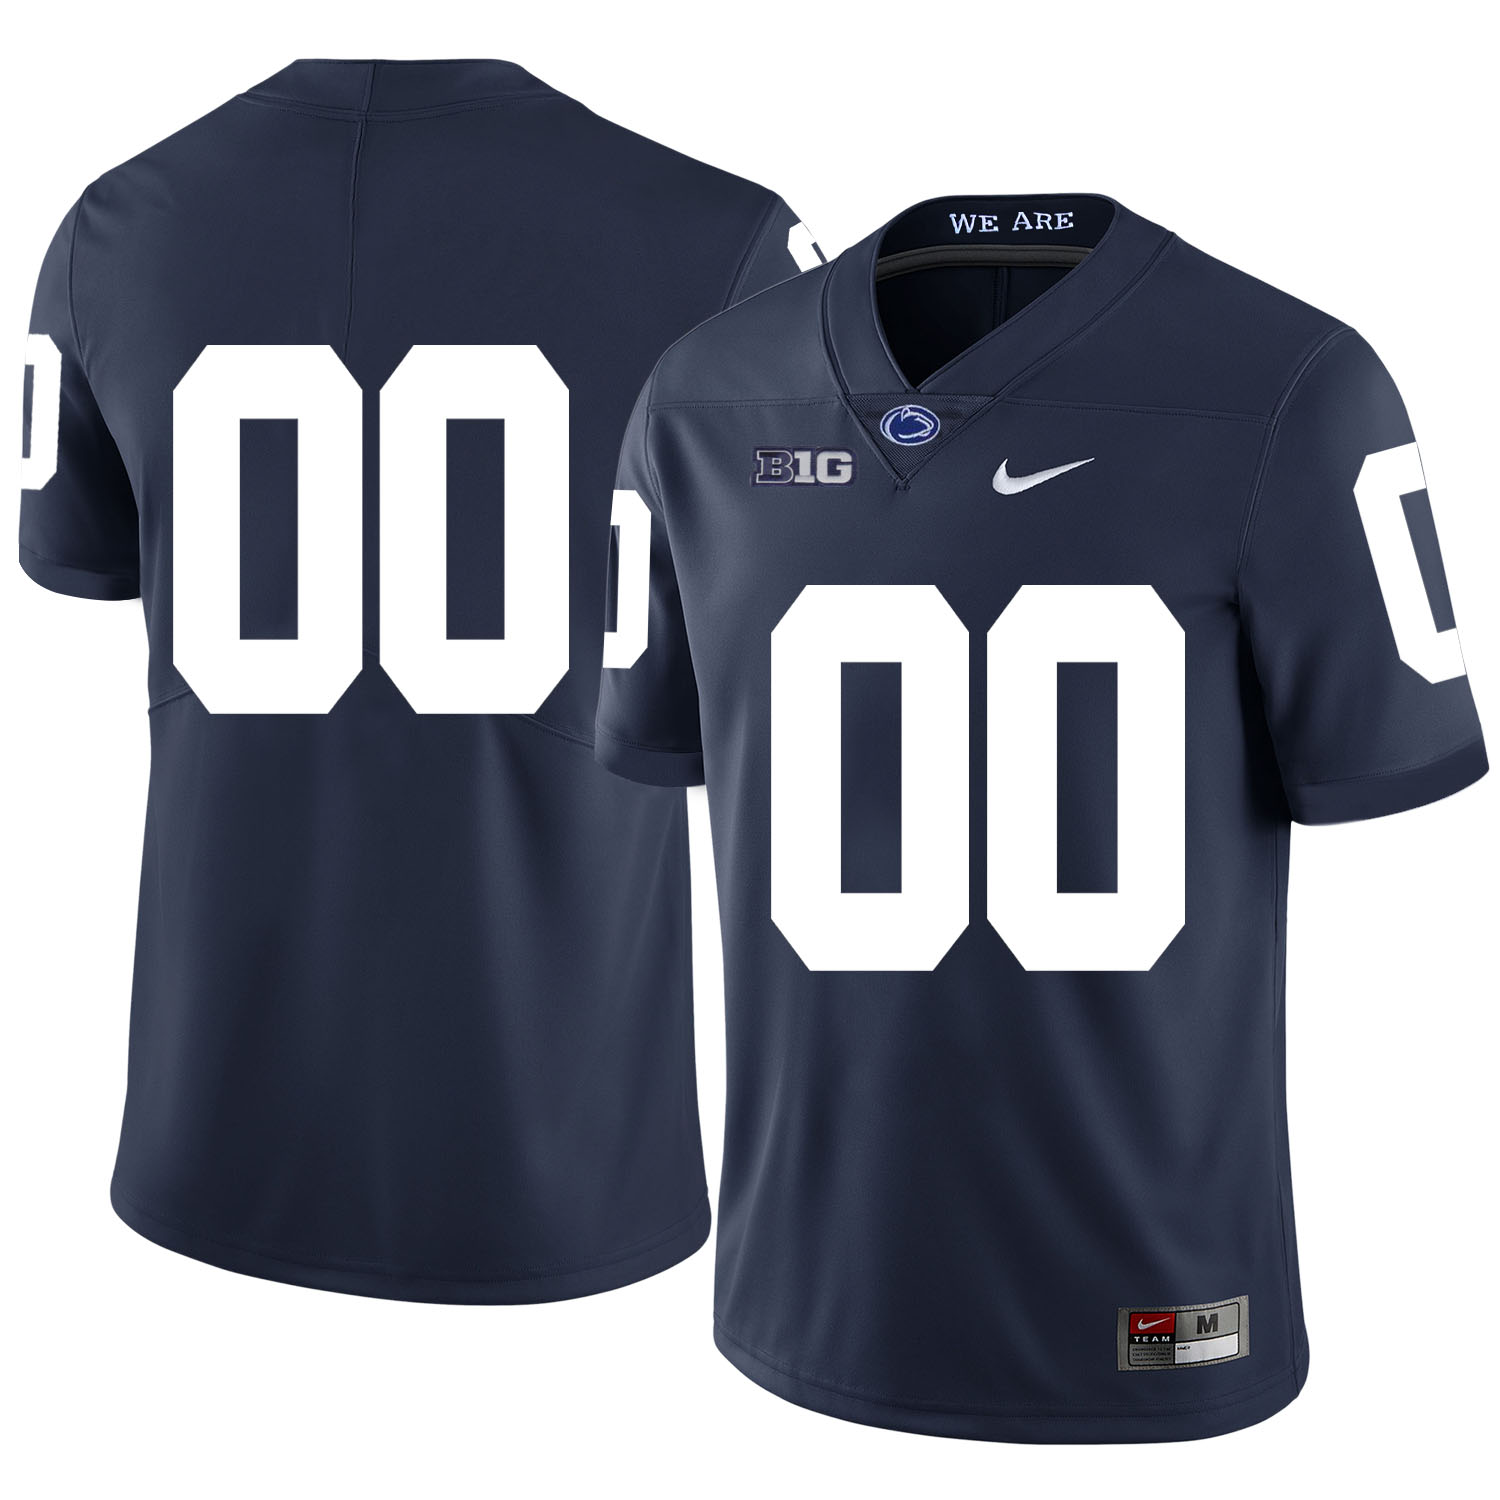 Penn State Nittany Lions Navy Men's Customized Nike College Football Jersey